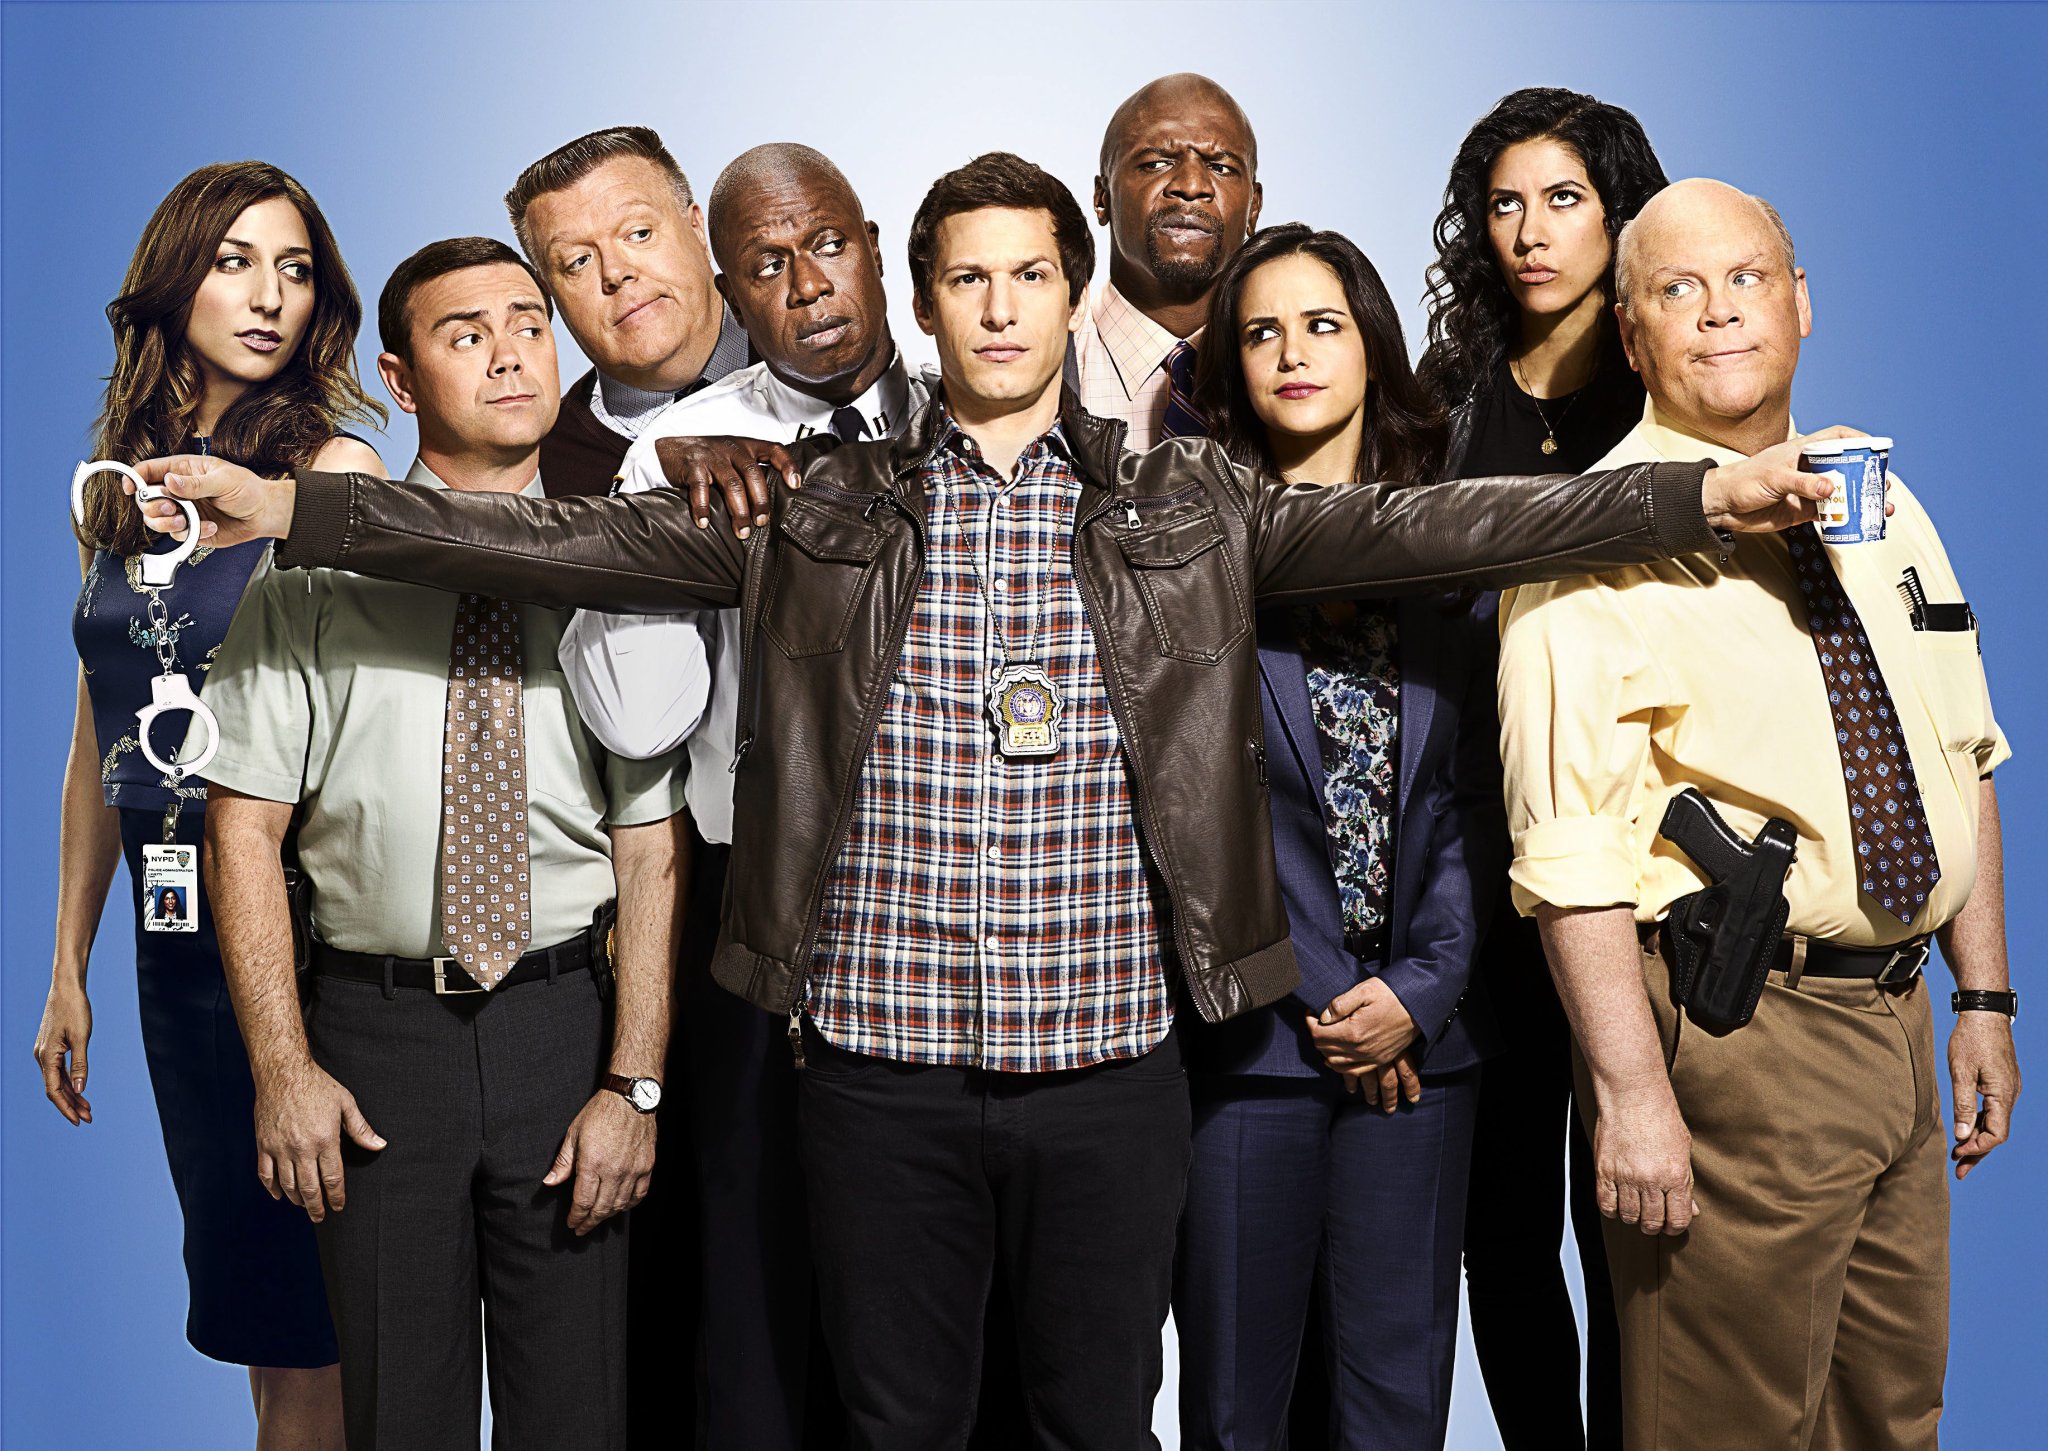 Cast Of Brooklyn Nine-Nine: How Much Are They Worth?